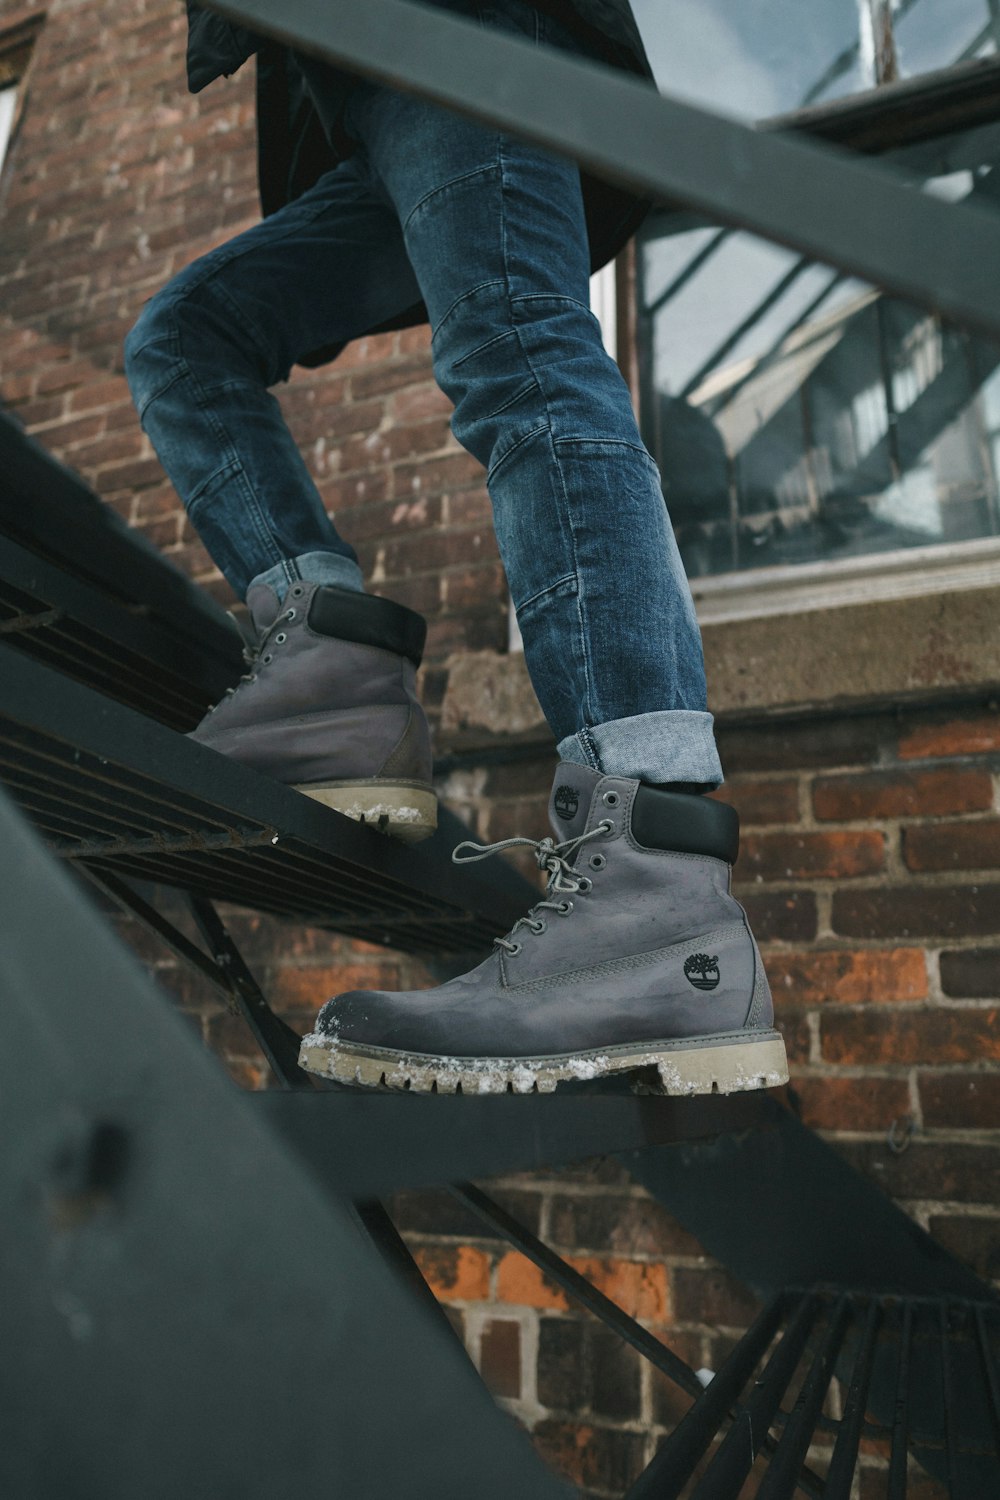 person wearing gray Timberland work boots climbing on black metal stairs